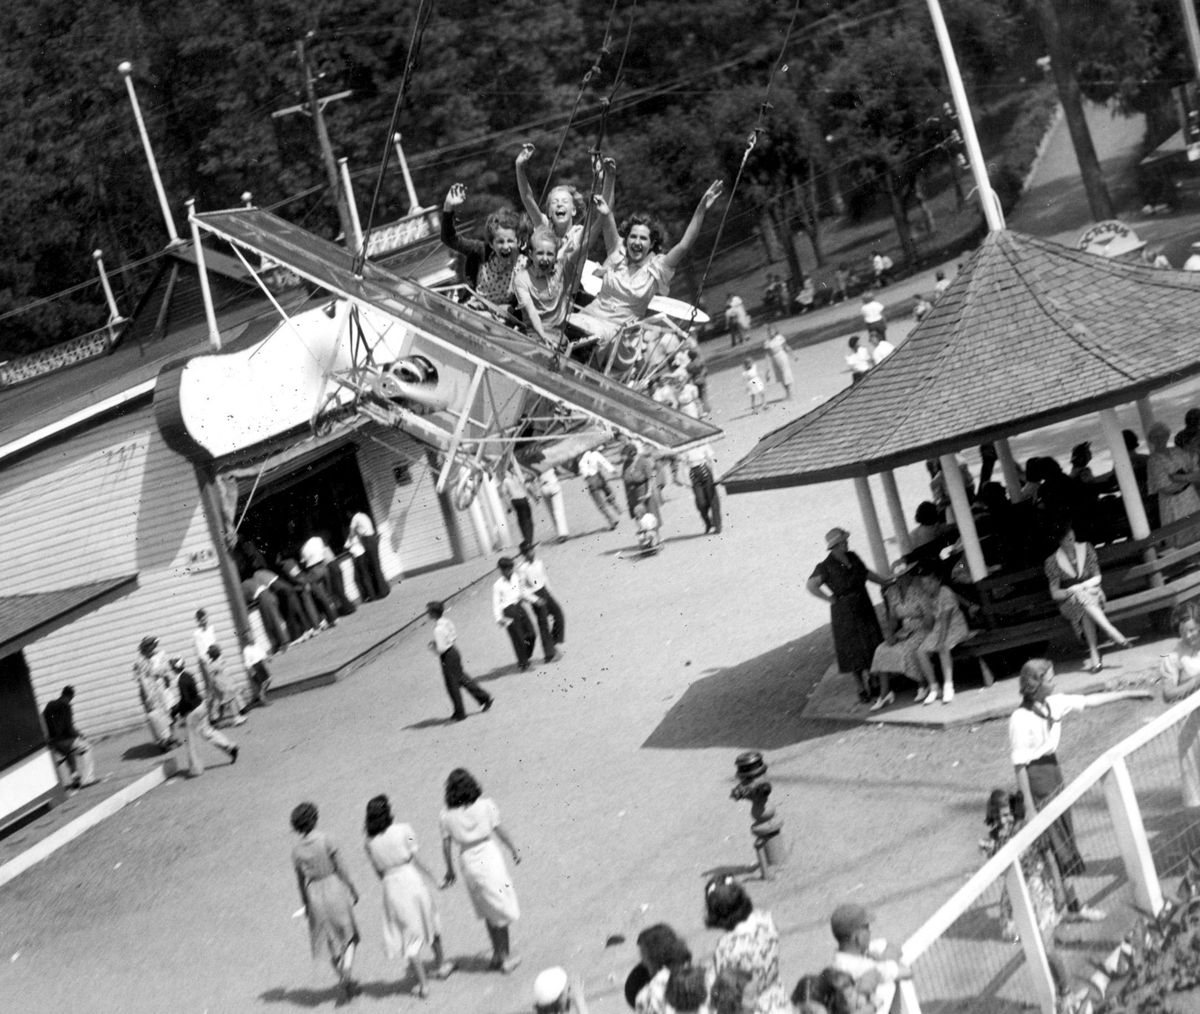 In 1941 the amusement rides at Natatorium Park were in full swing. The park, which opened in 1893, was originally known as Twickenham Park, and was operated by Spokane United Railways until 1929 when it was sold to Louis Vogel. The park closed in 1968. The land is now occupied by a mobile home park.  (The Spokesman-Review photo archive)